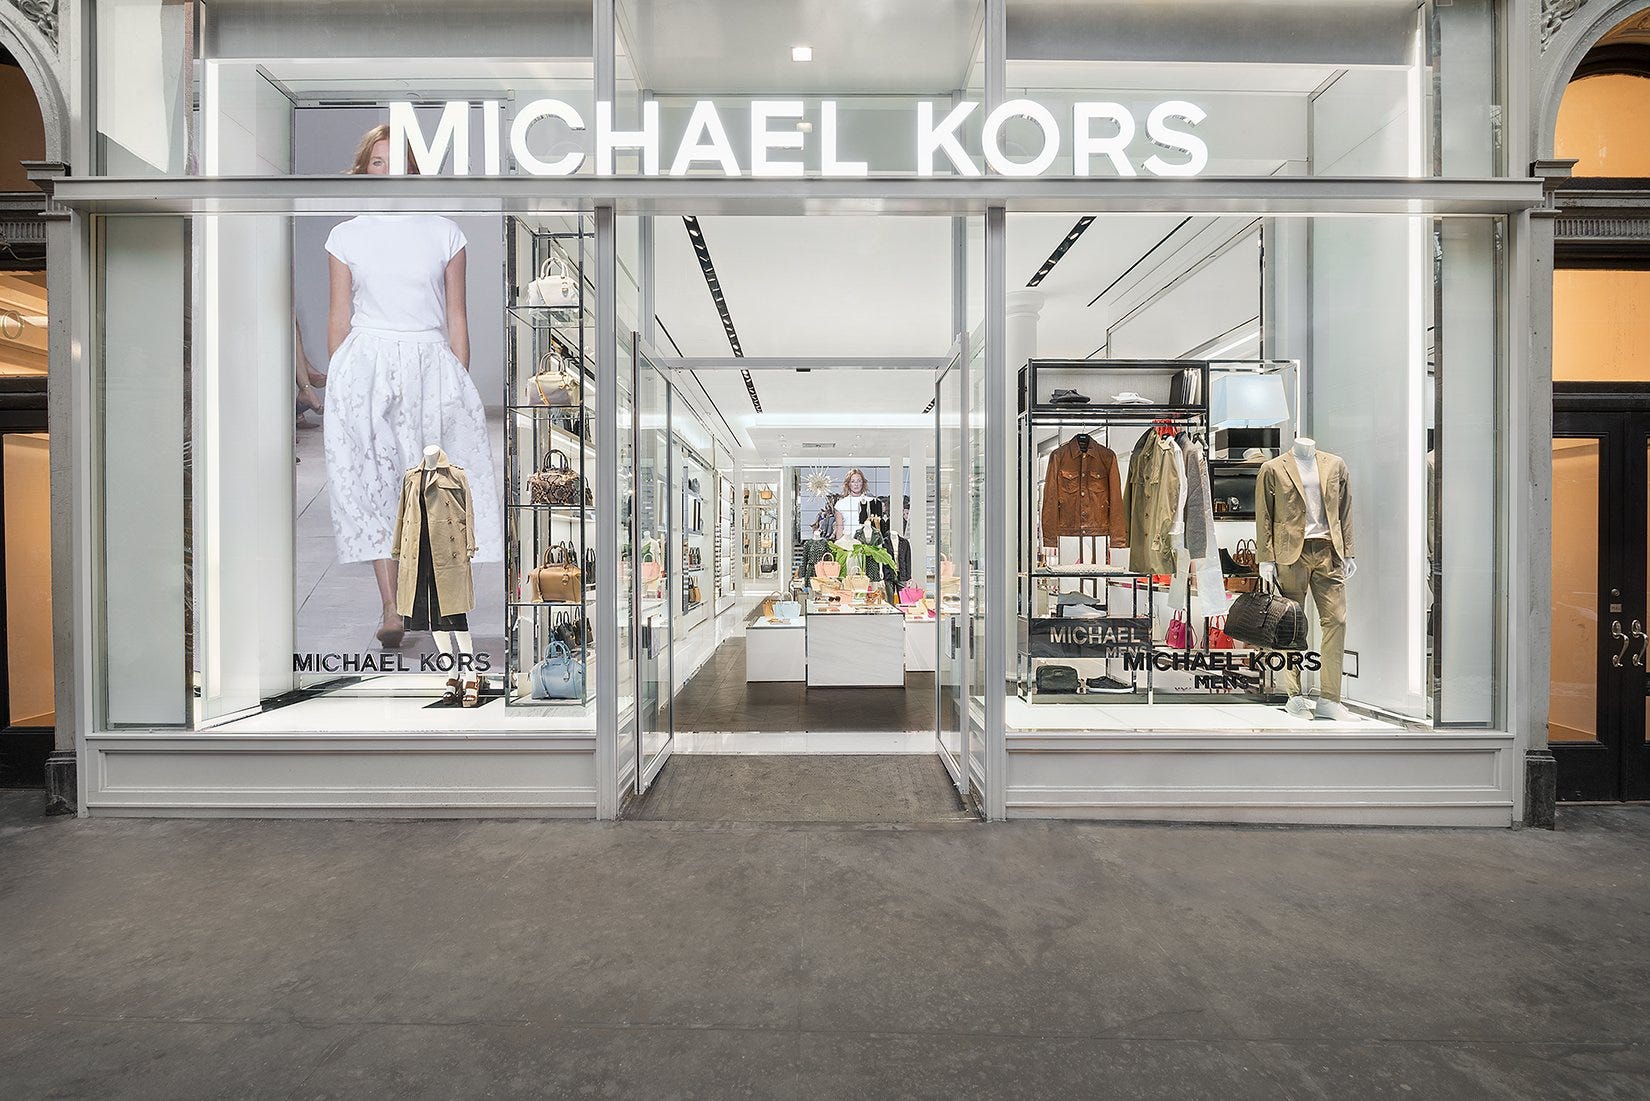 michael kors factory outlet coupon